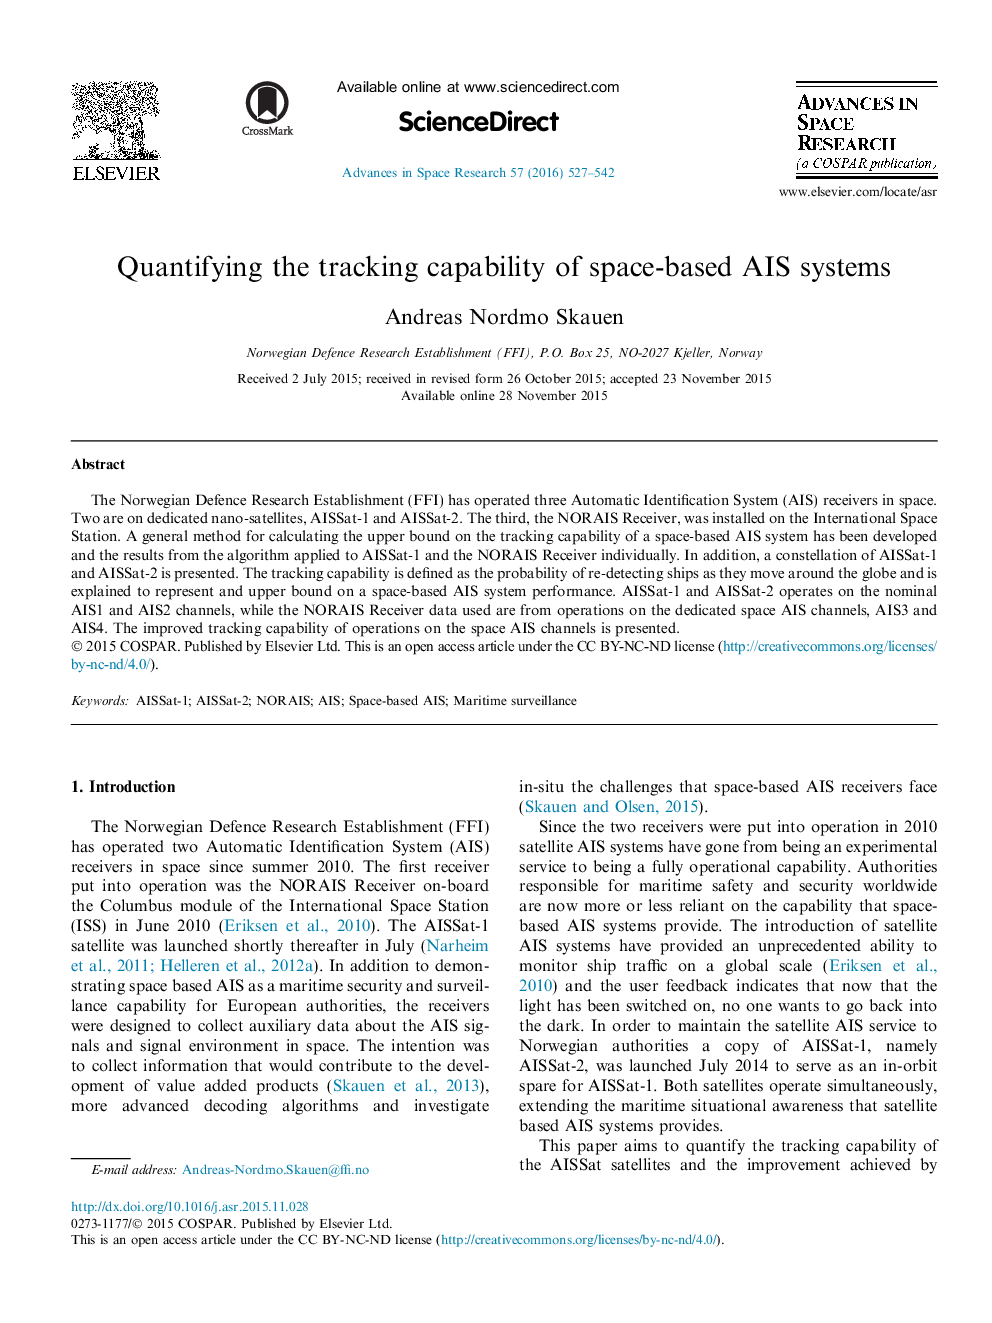 Quantifying the tracking capability of space-based AIS systems